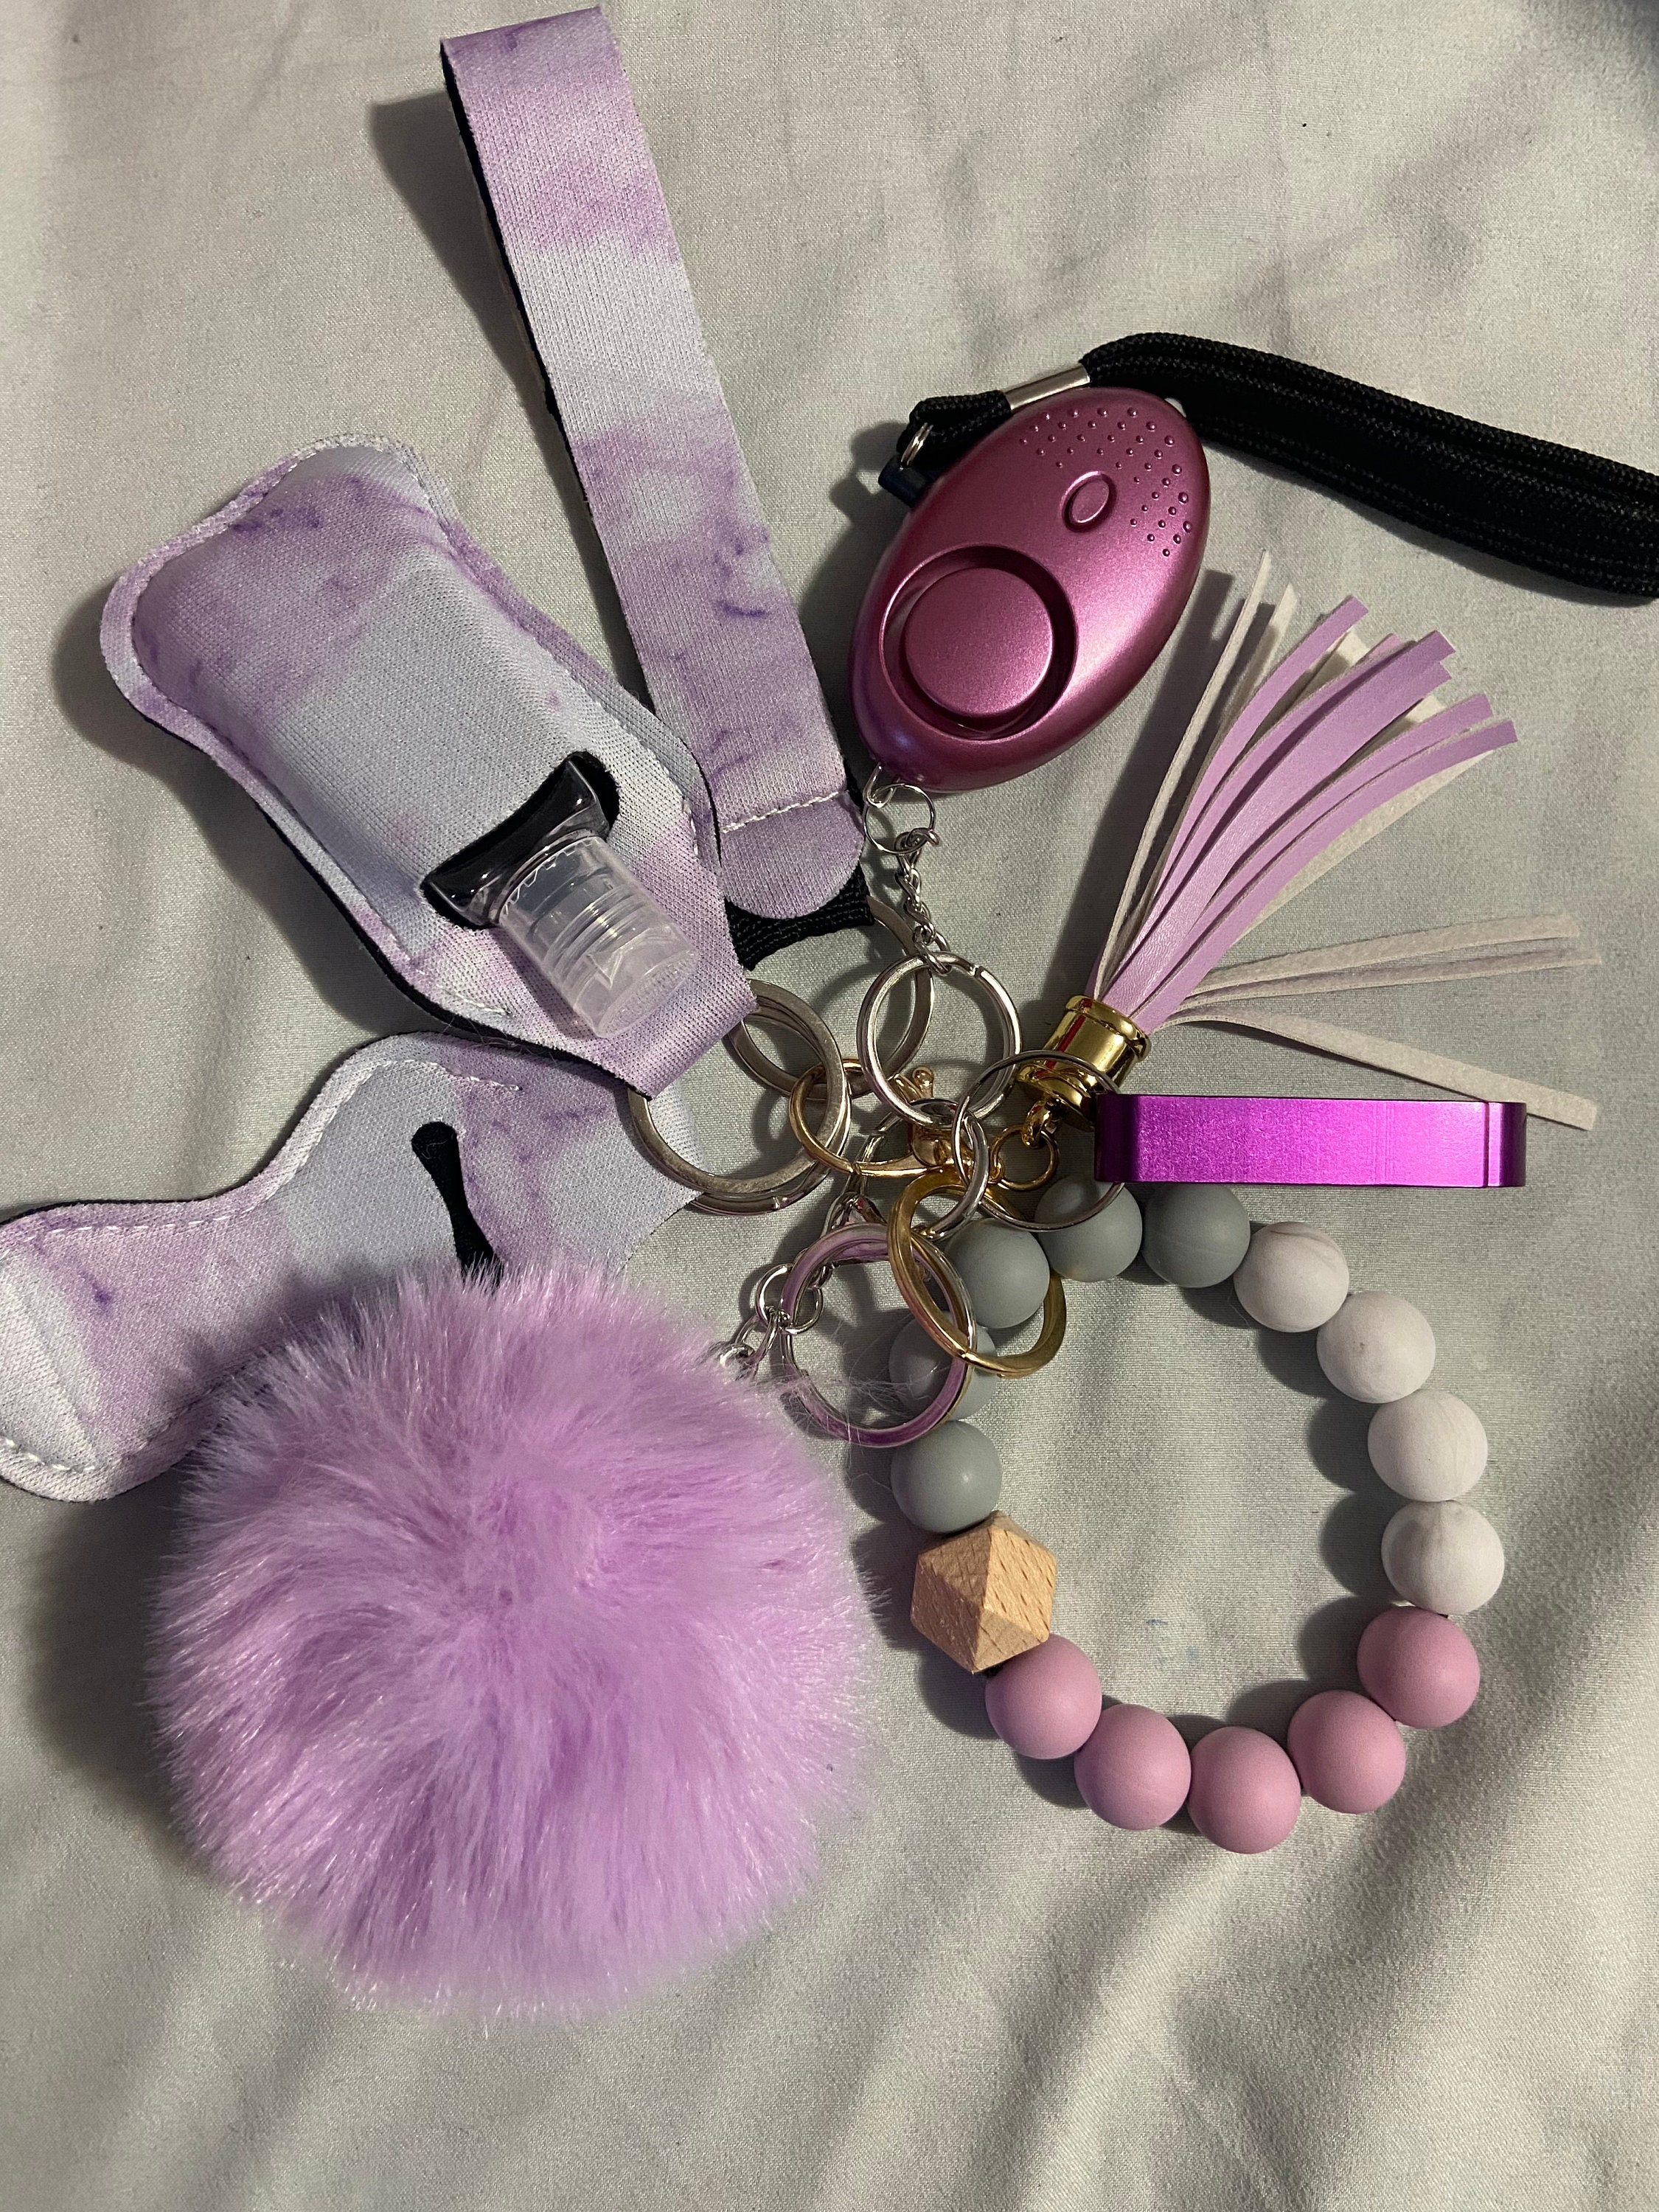 Ladies self defense keychain set | College Students | Safety | Protection